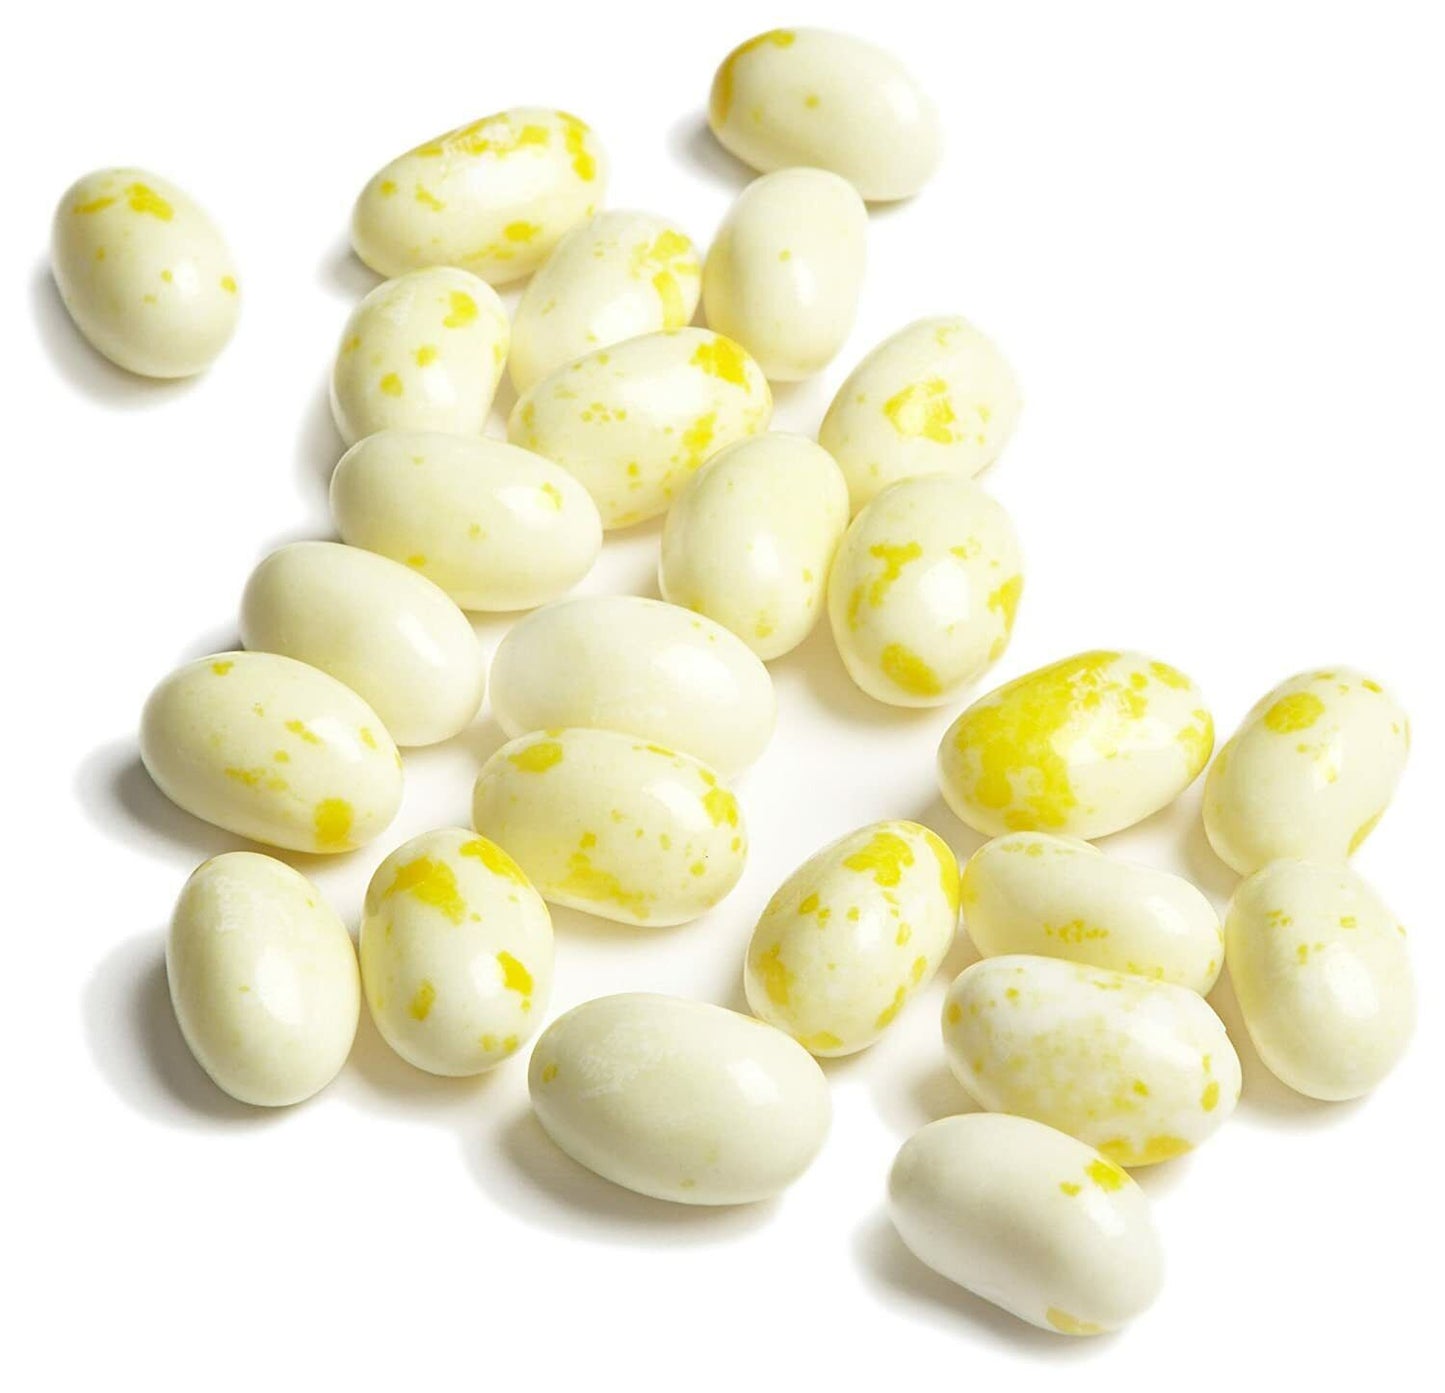 Buttered Popcorn Jelly Beans Bag